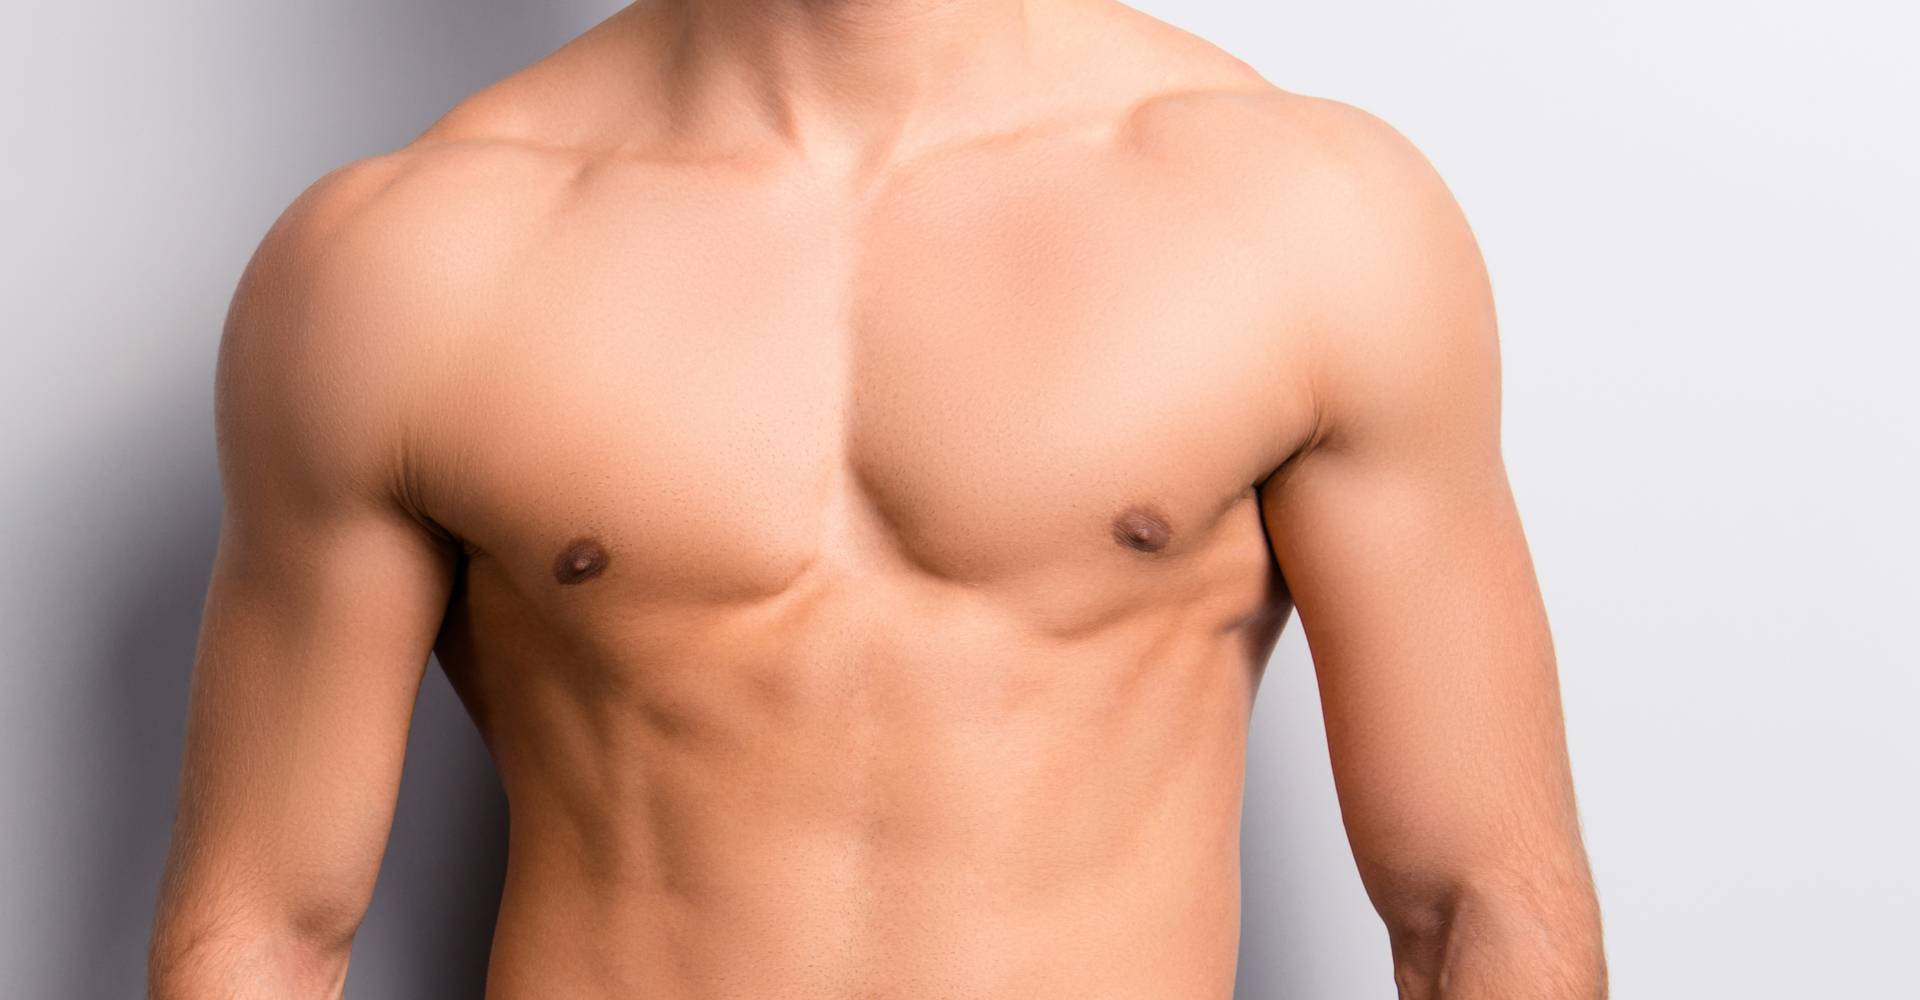 Can Exercise Get Rid Of Gynecomastia? Ask An Expert